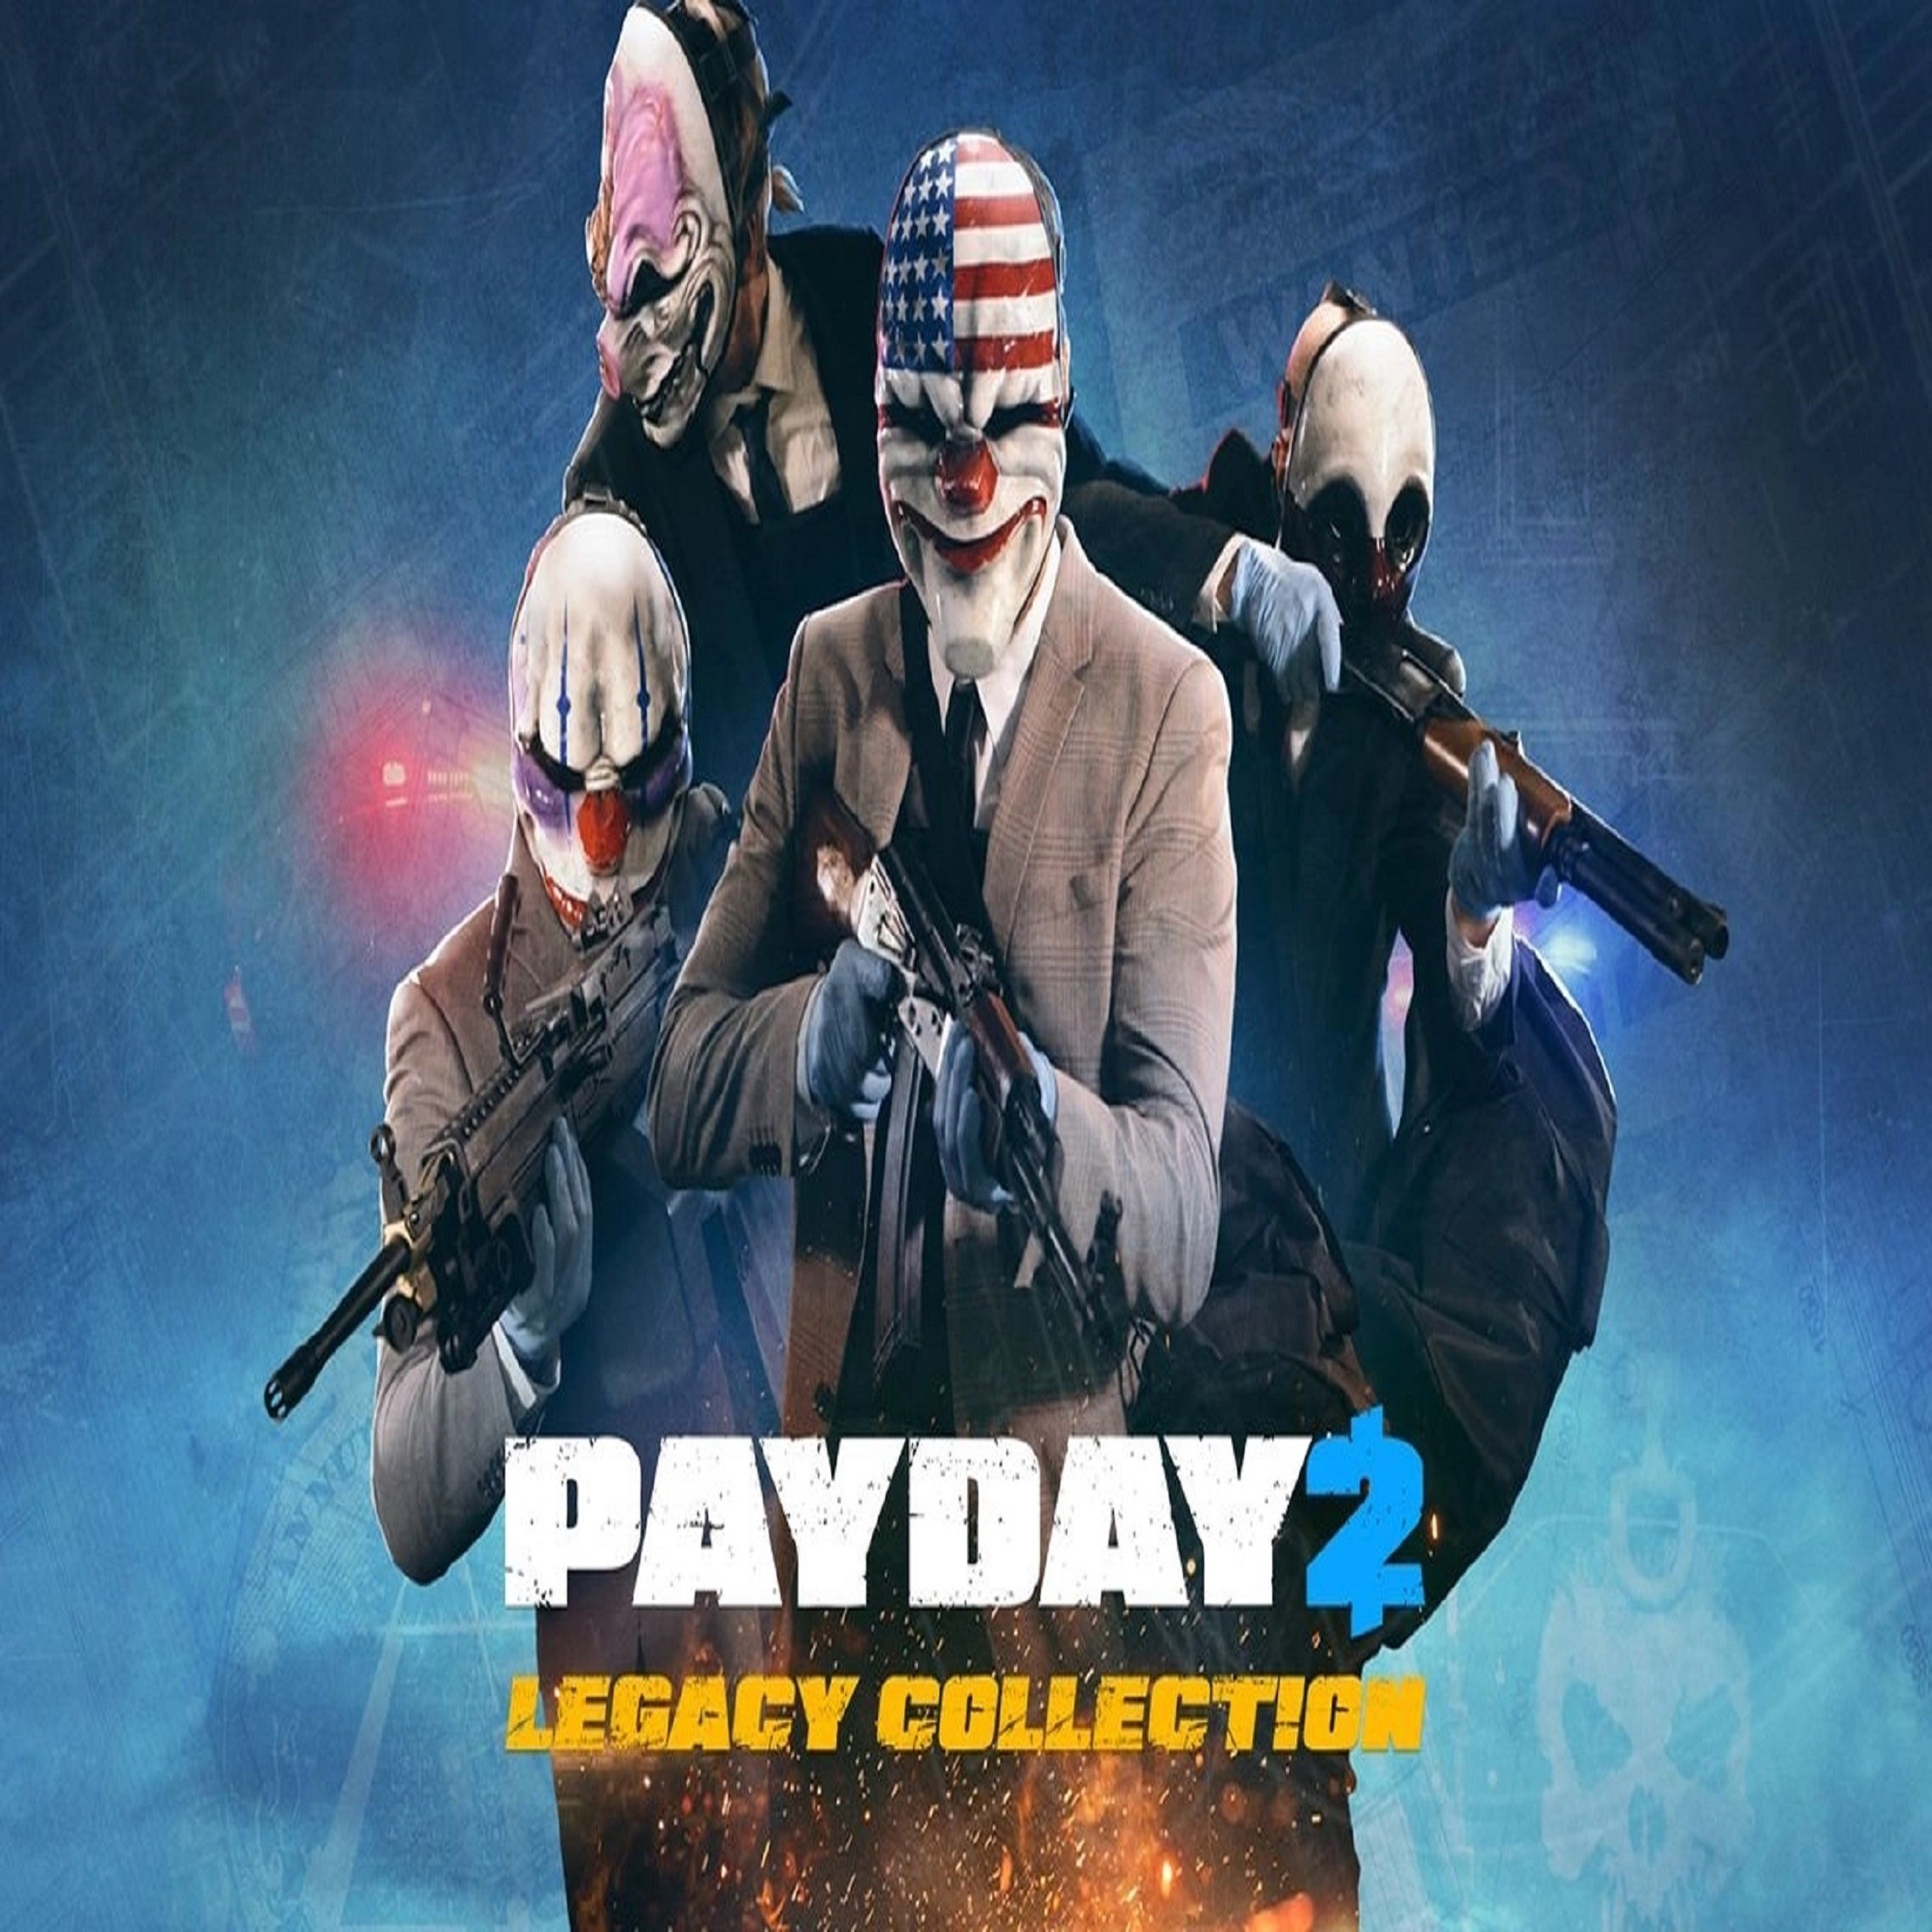 Payday 2 legacy collection скидки фото 2